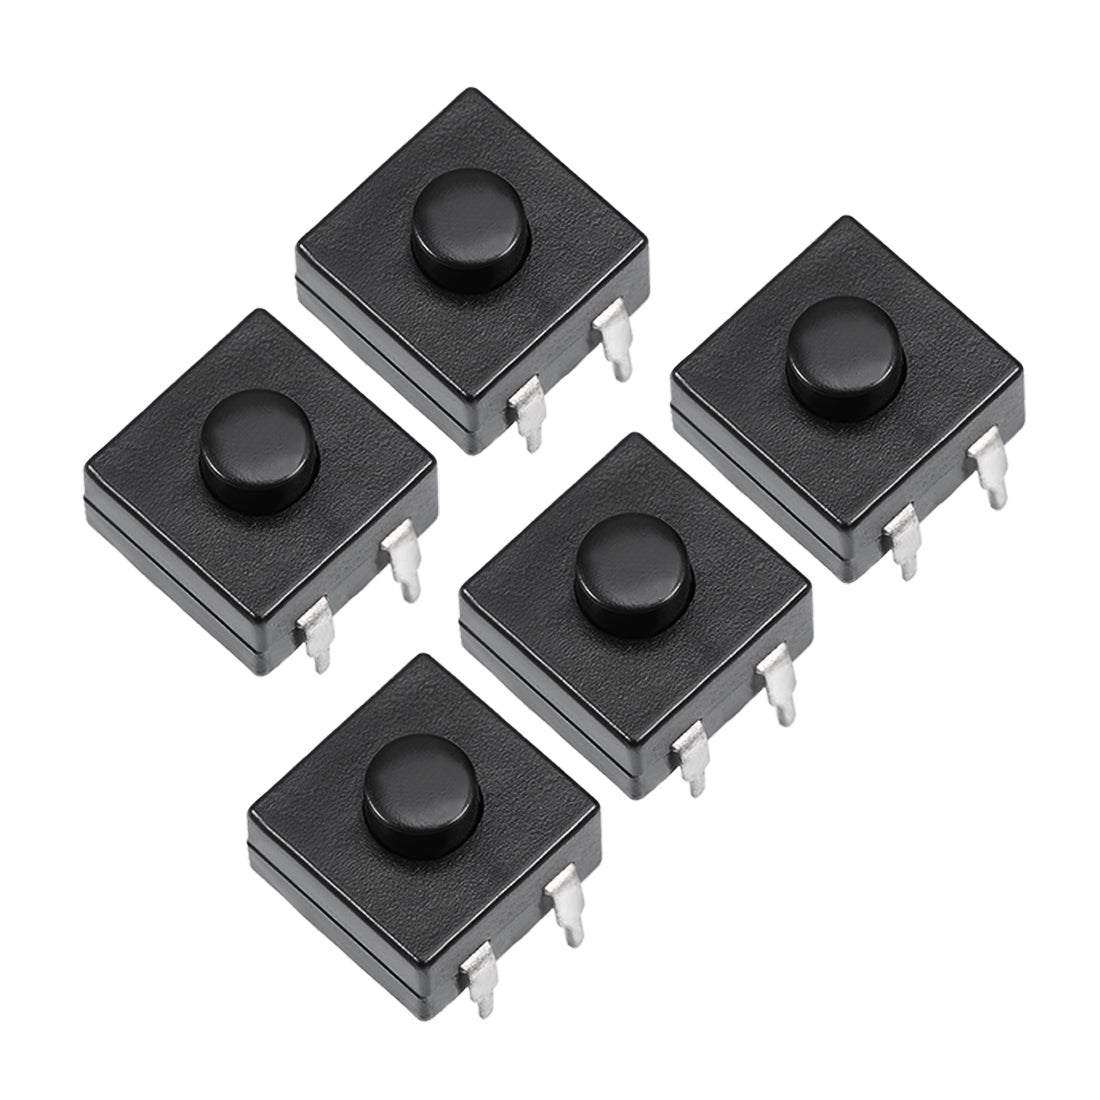 uxcell Uxcell 5 Pcs 12x12x9mm 3 Poles PCB Latching Tactile Tact Push Button Switch for Torch